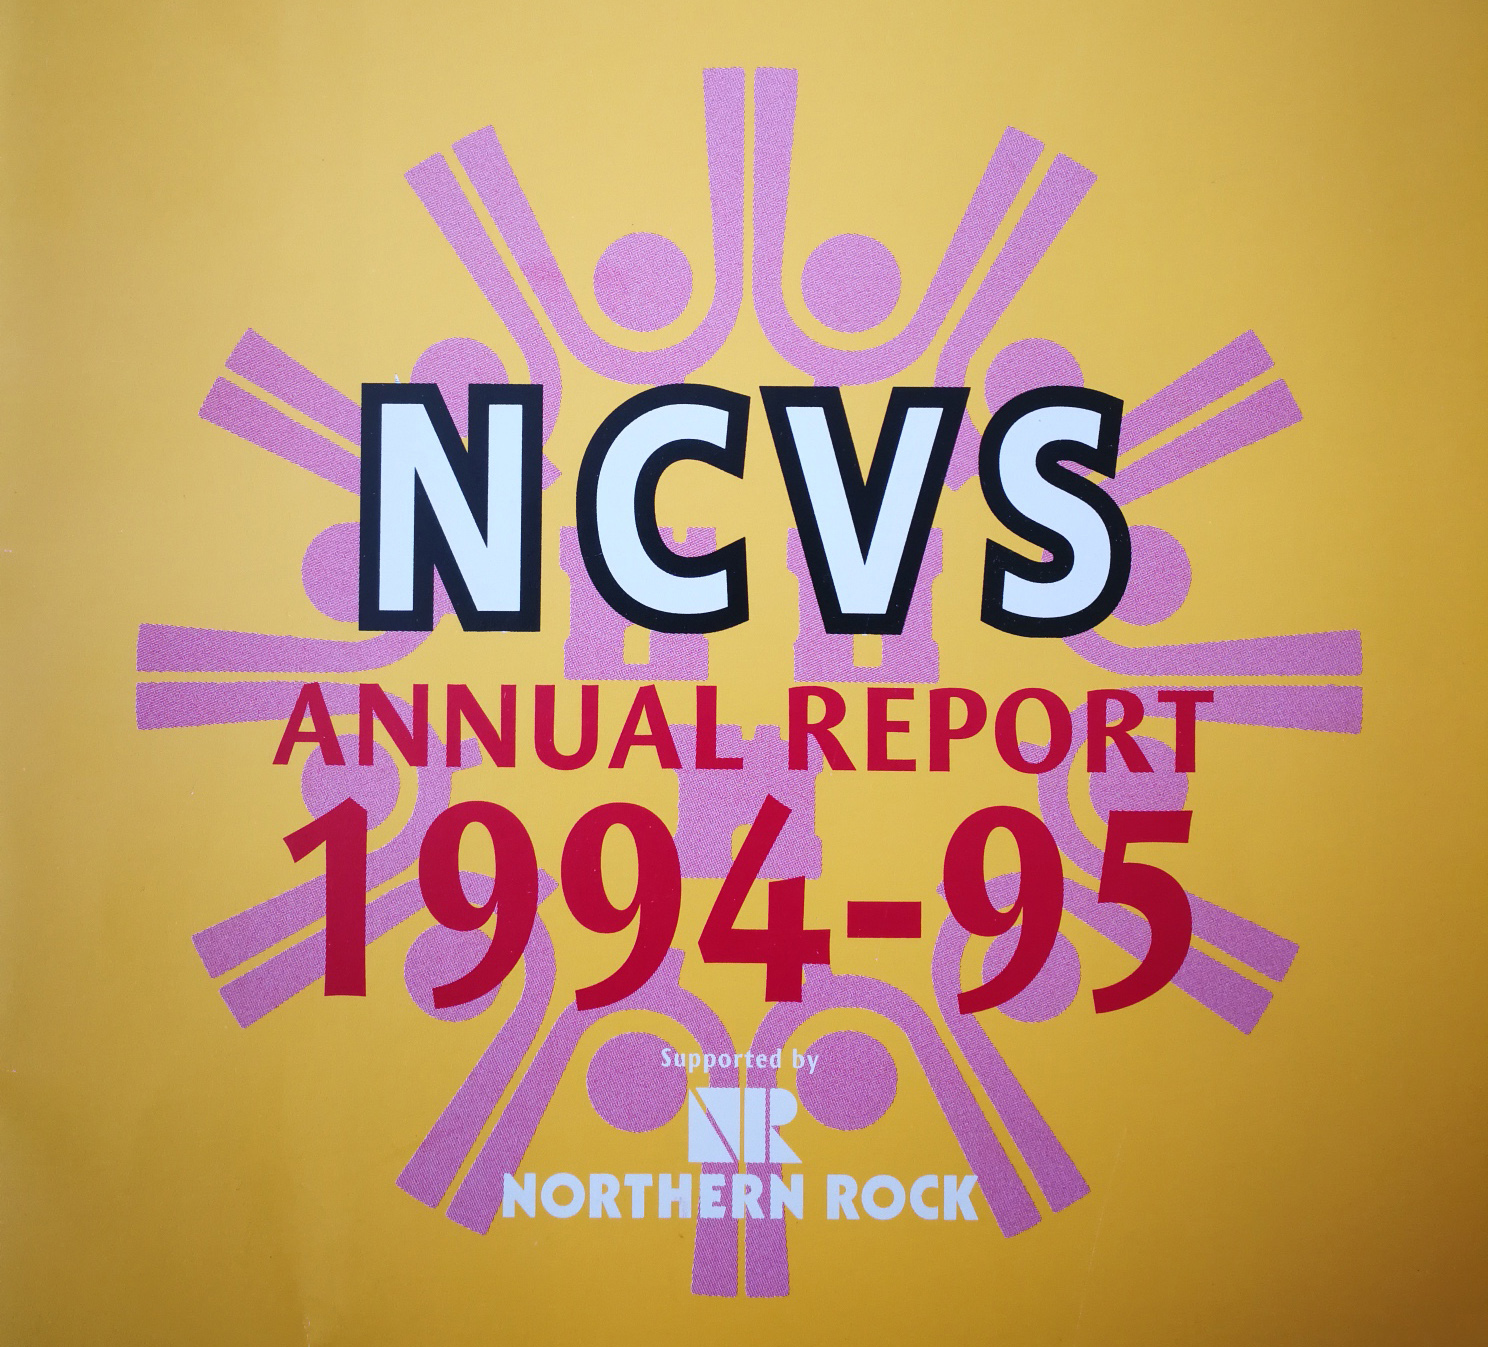 Old NCVS logo with a circle of people icon